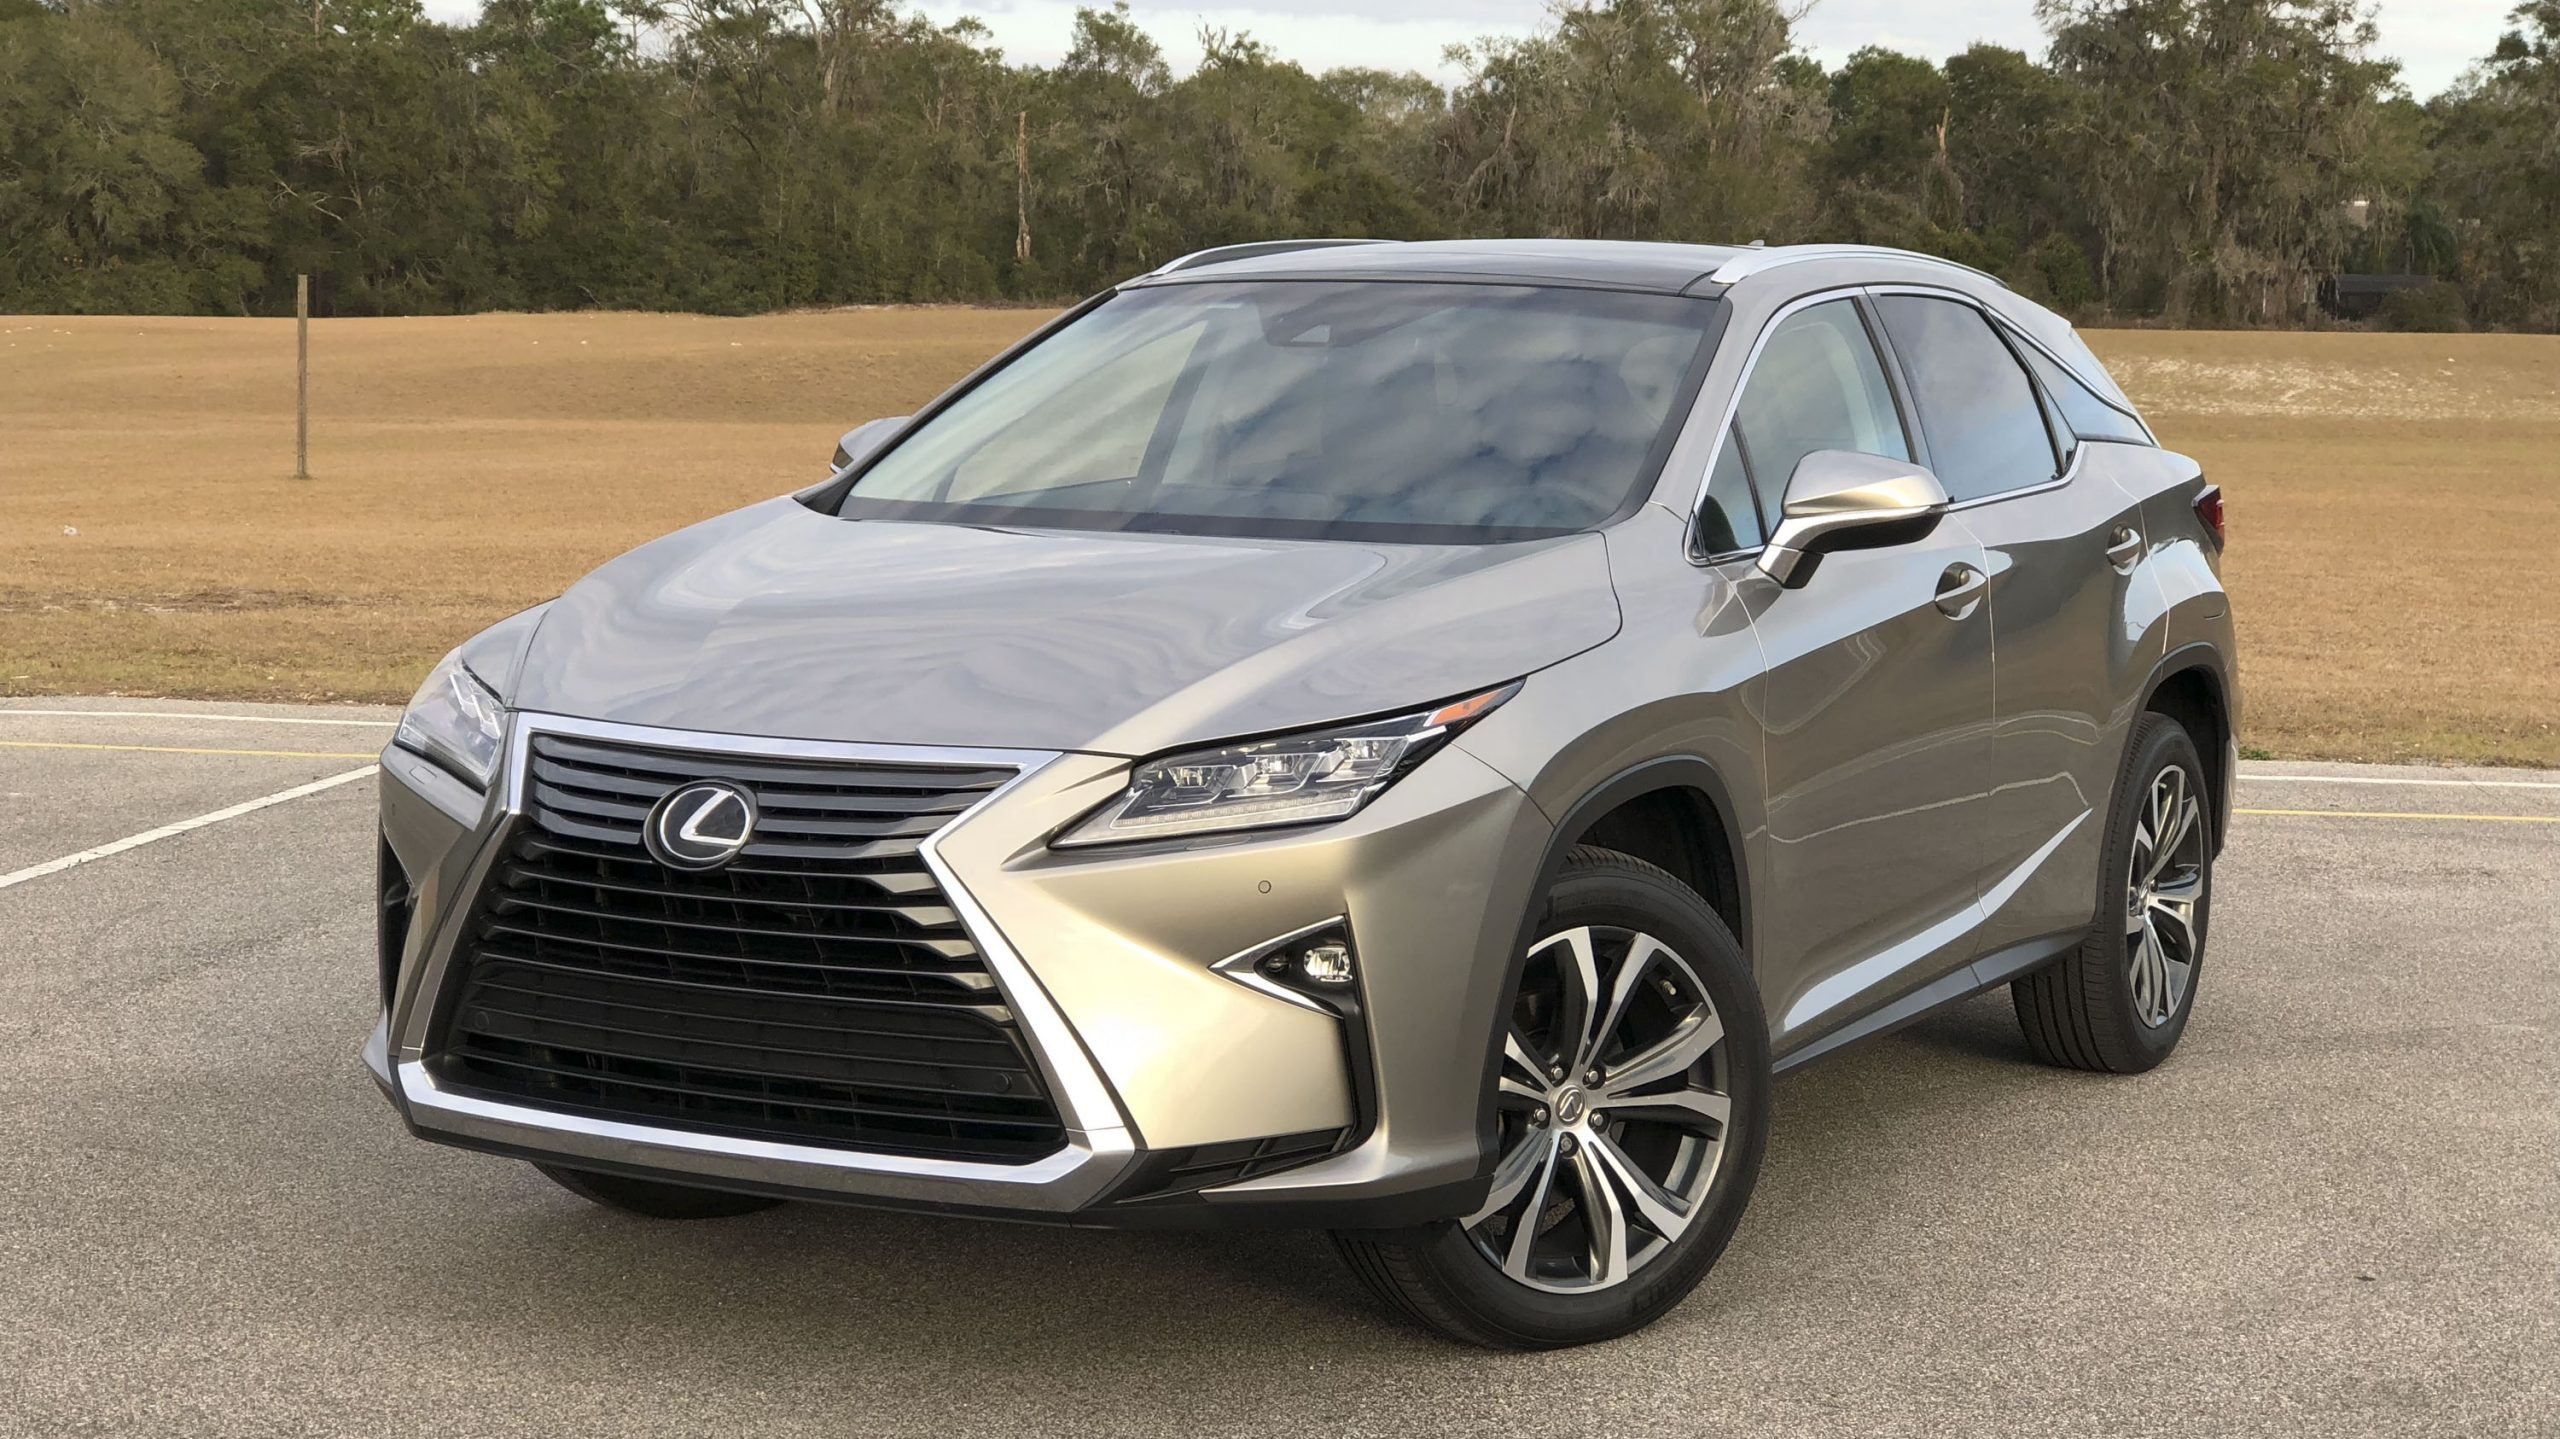 New 2022 Lexus Rx 350 Options And Packages, Oil Type